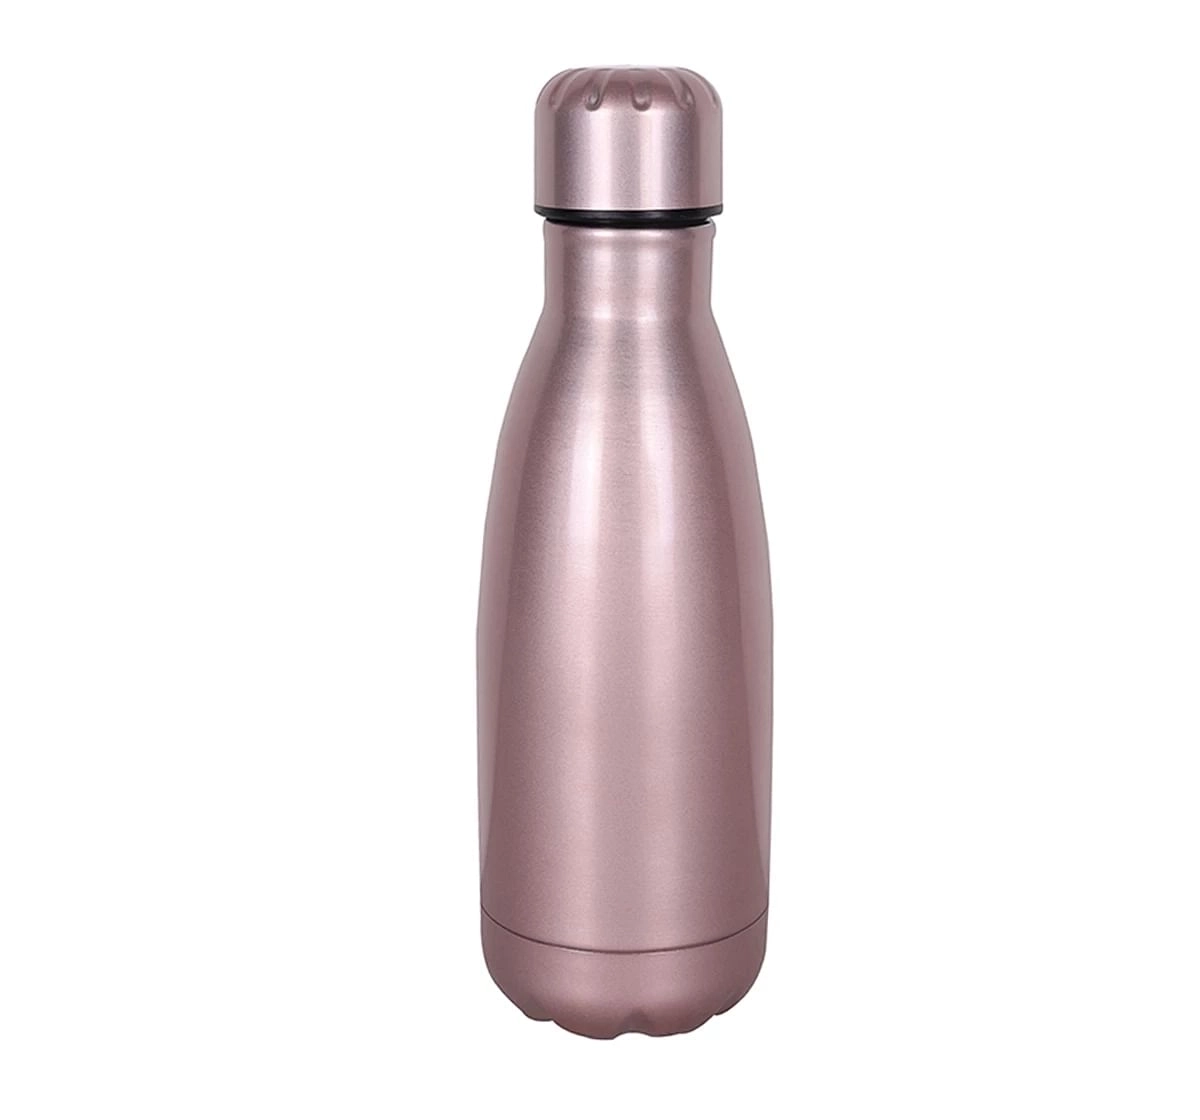 Stainless Steel Insulated Water Bottle by Hamster London for Kids, Rose Pink, Non-Toxic, BPA Free, 350ml, 5Y+